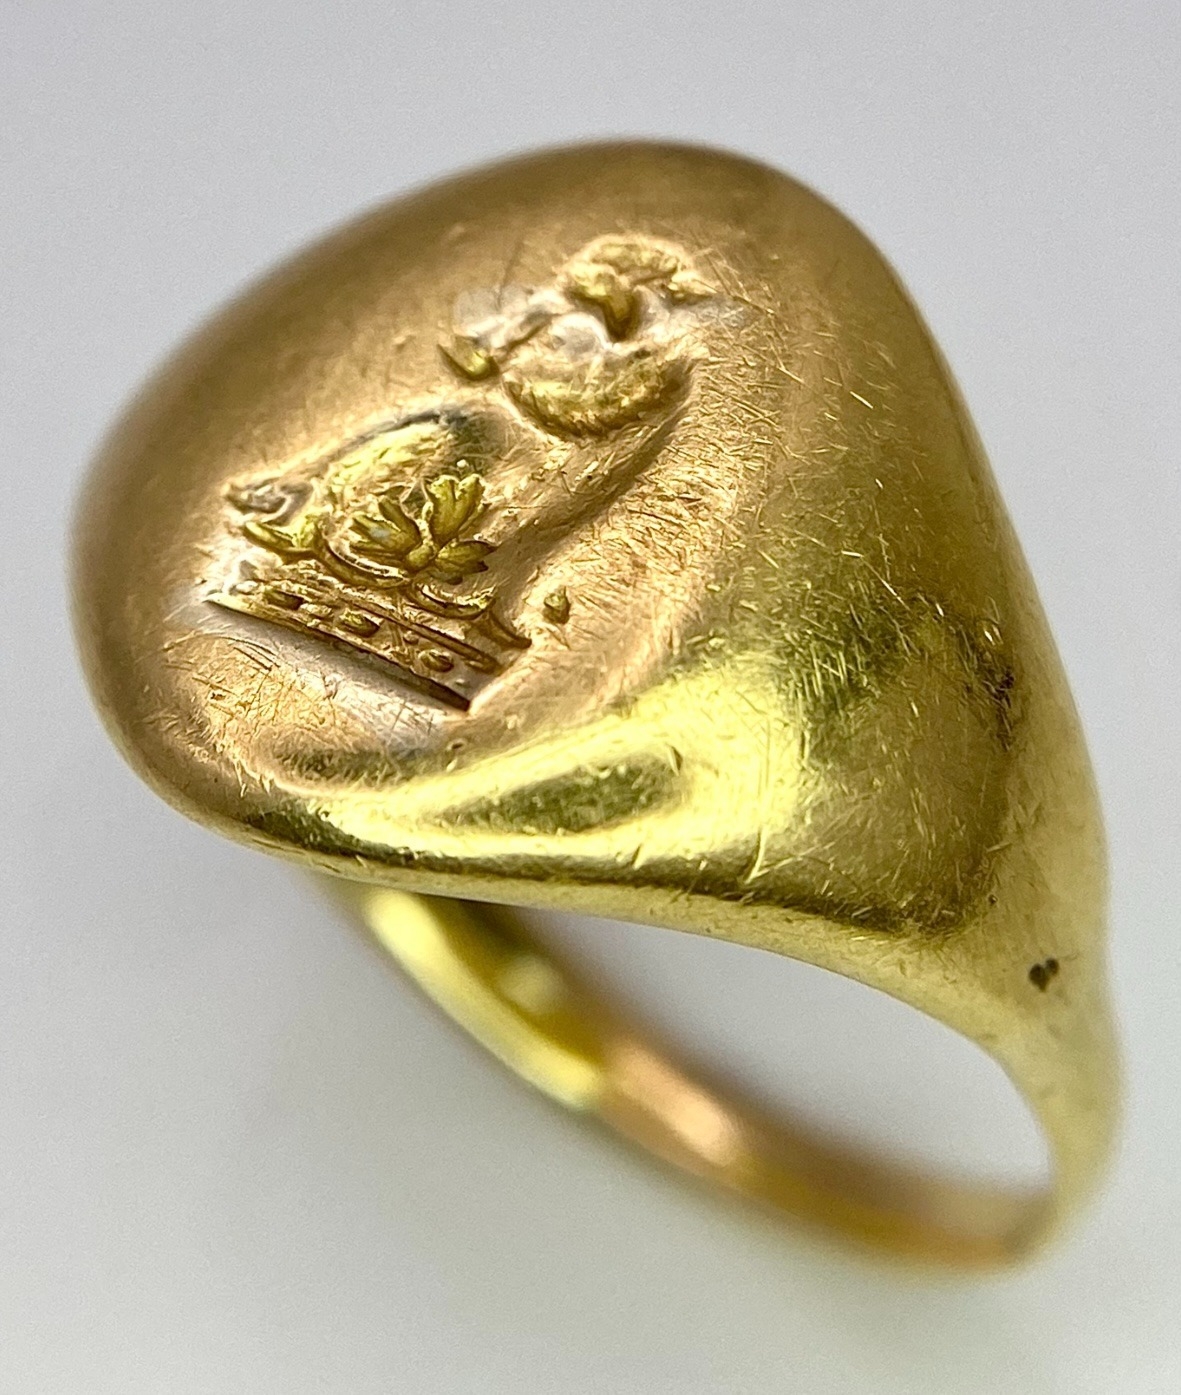 AN 18K YELLOW GOLD VINTAGE SEAL ENGRAVED SIGNET RING. Size K, 7.8g total weight. Ref: SC 8060 - Image 7 of 9